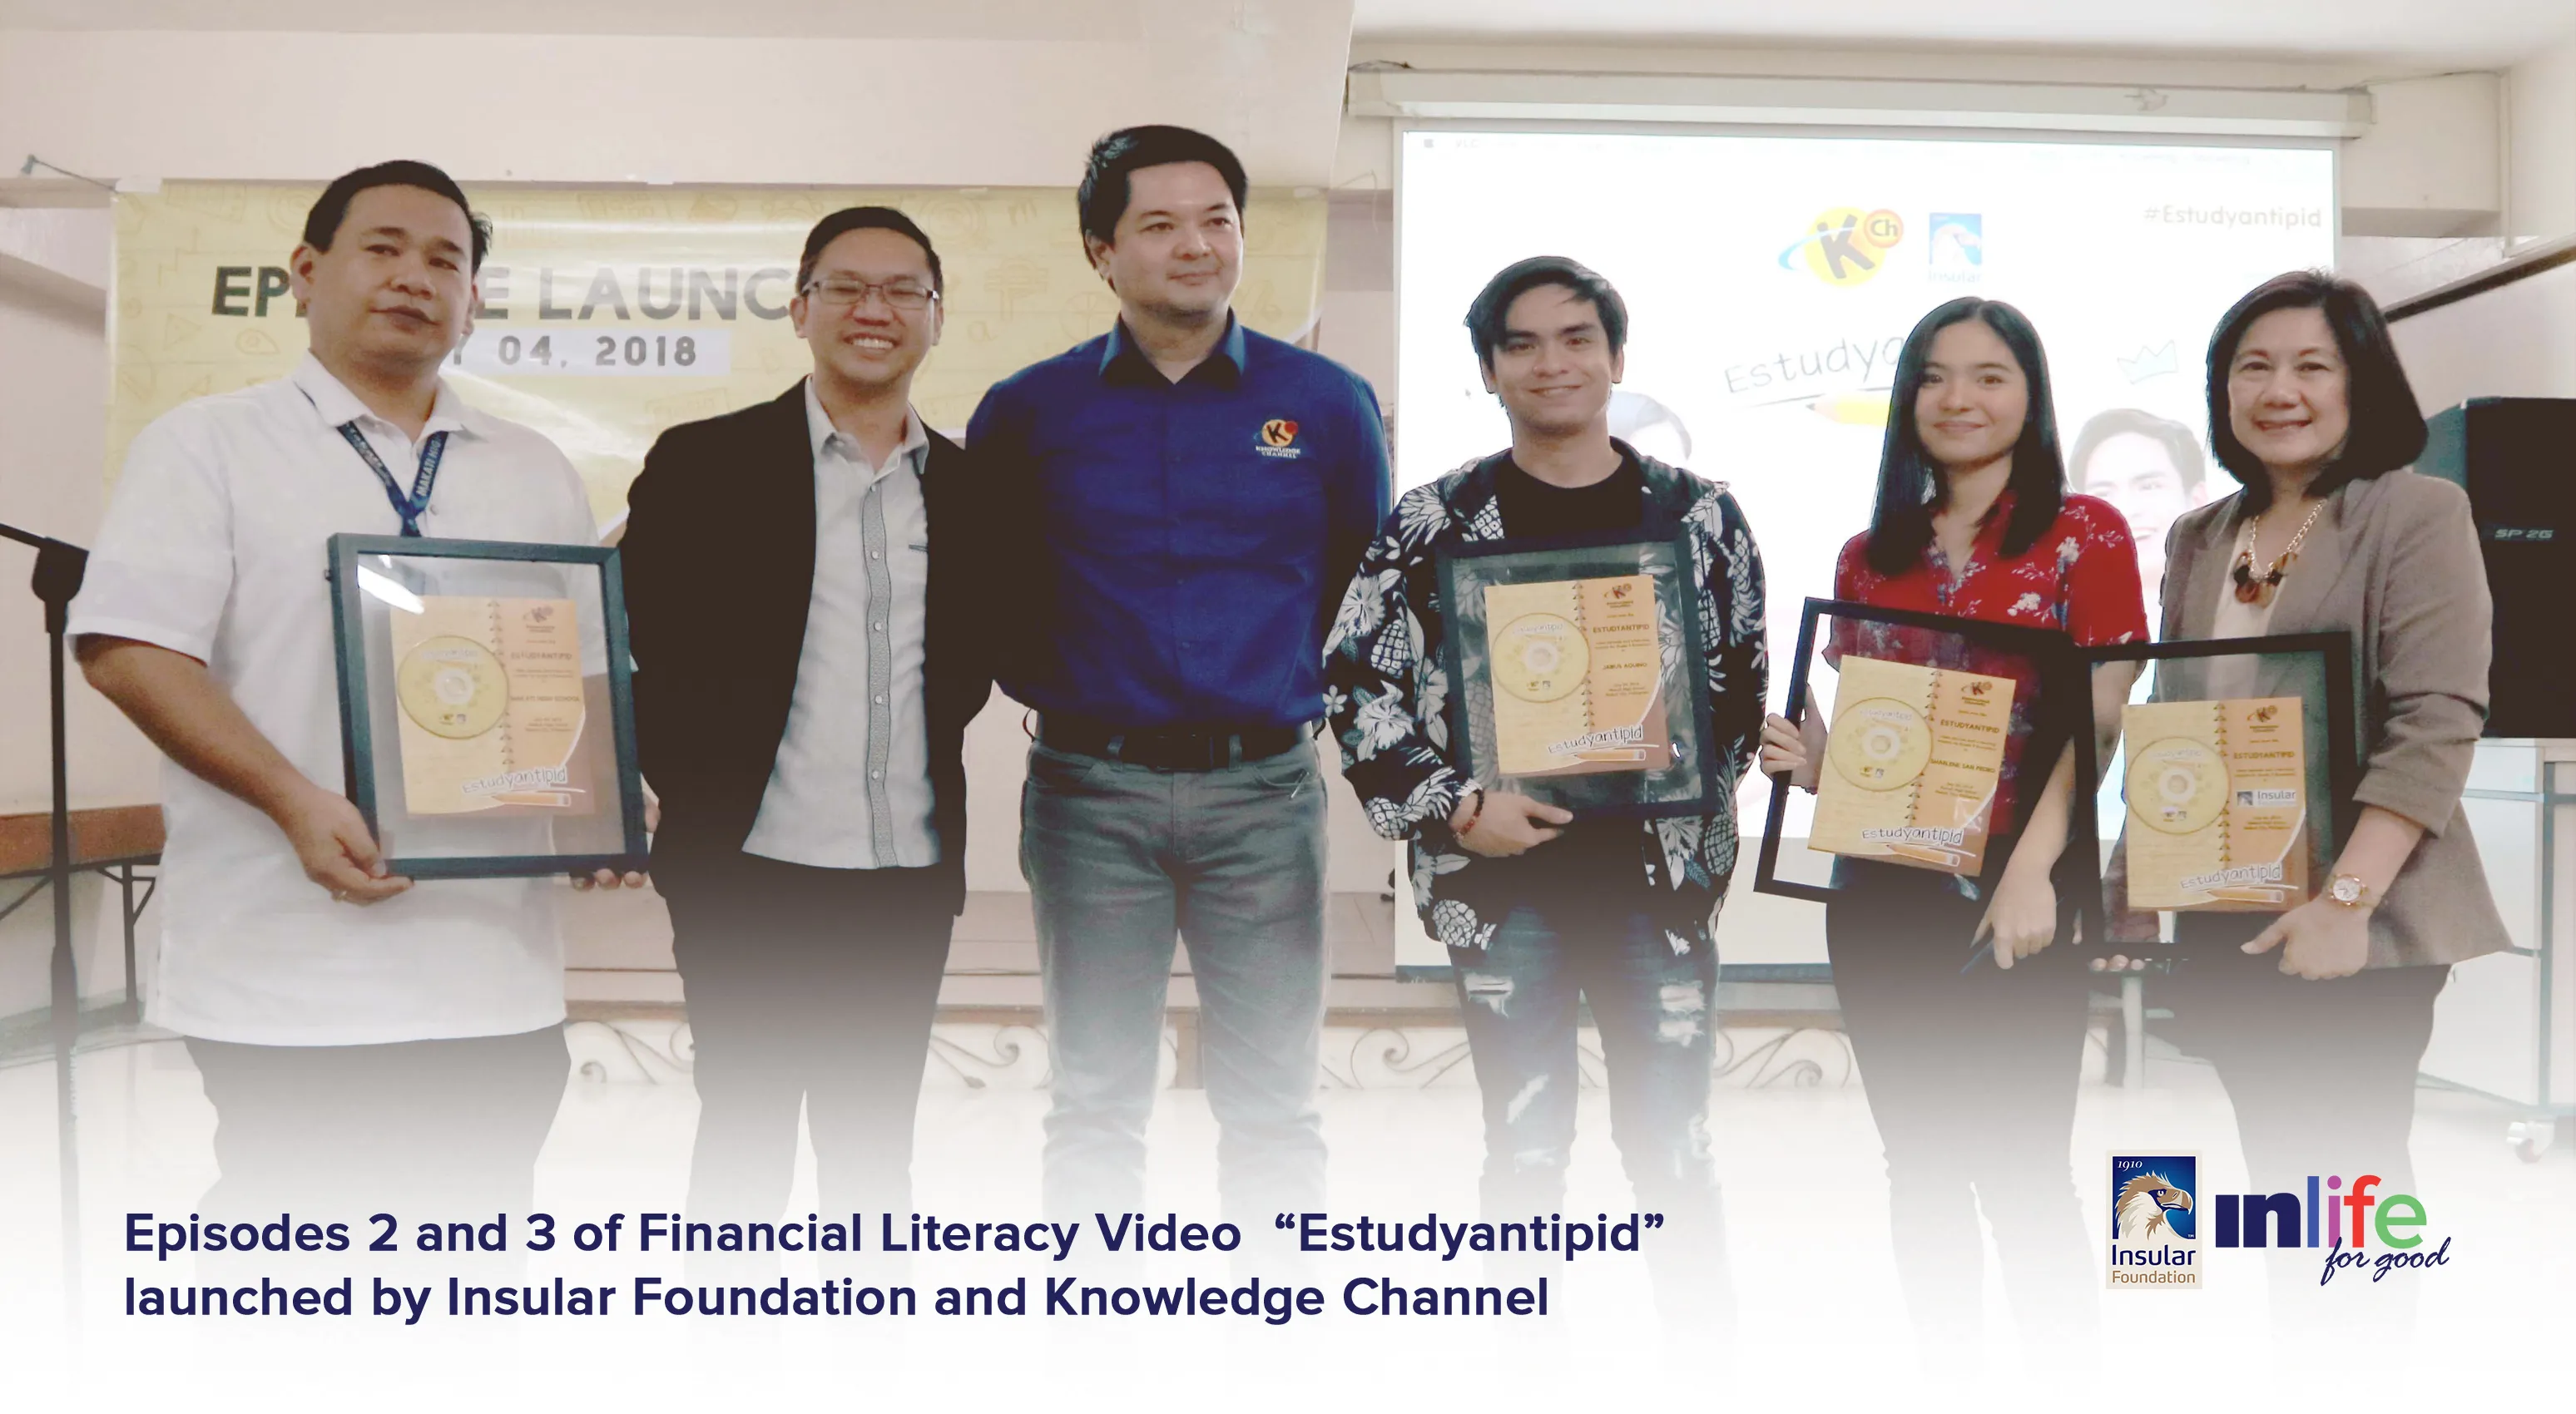 episodes-2-and-3-of-financial-literacy-video-estudyantipid-launched-by-insular-foundation-and-knowledge-channel